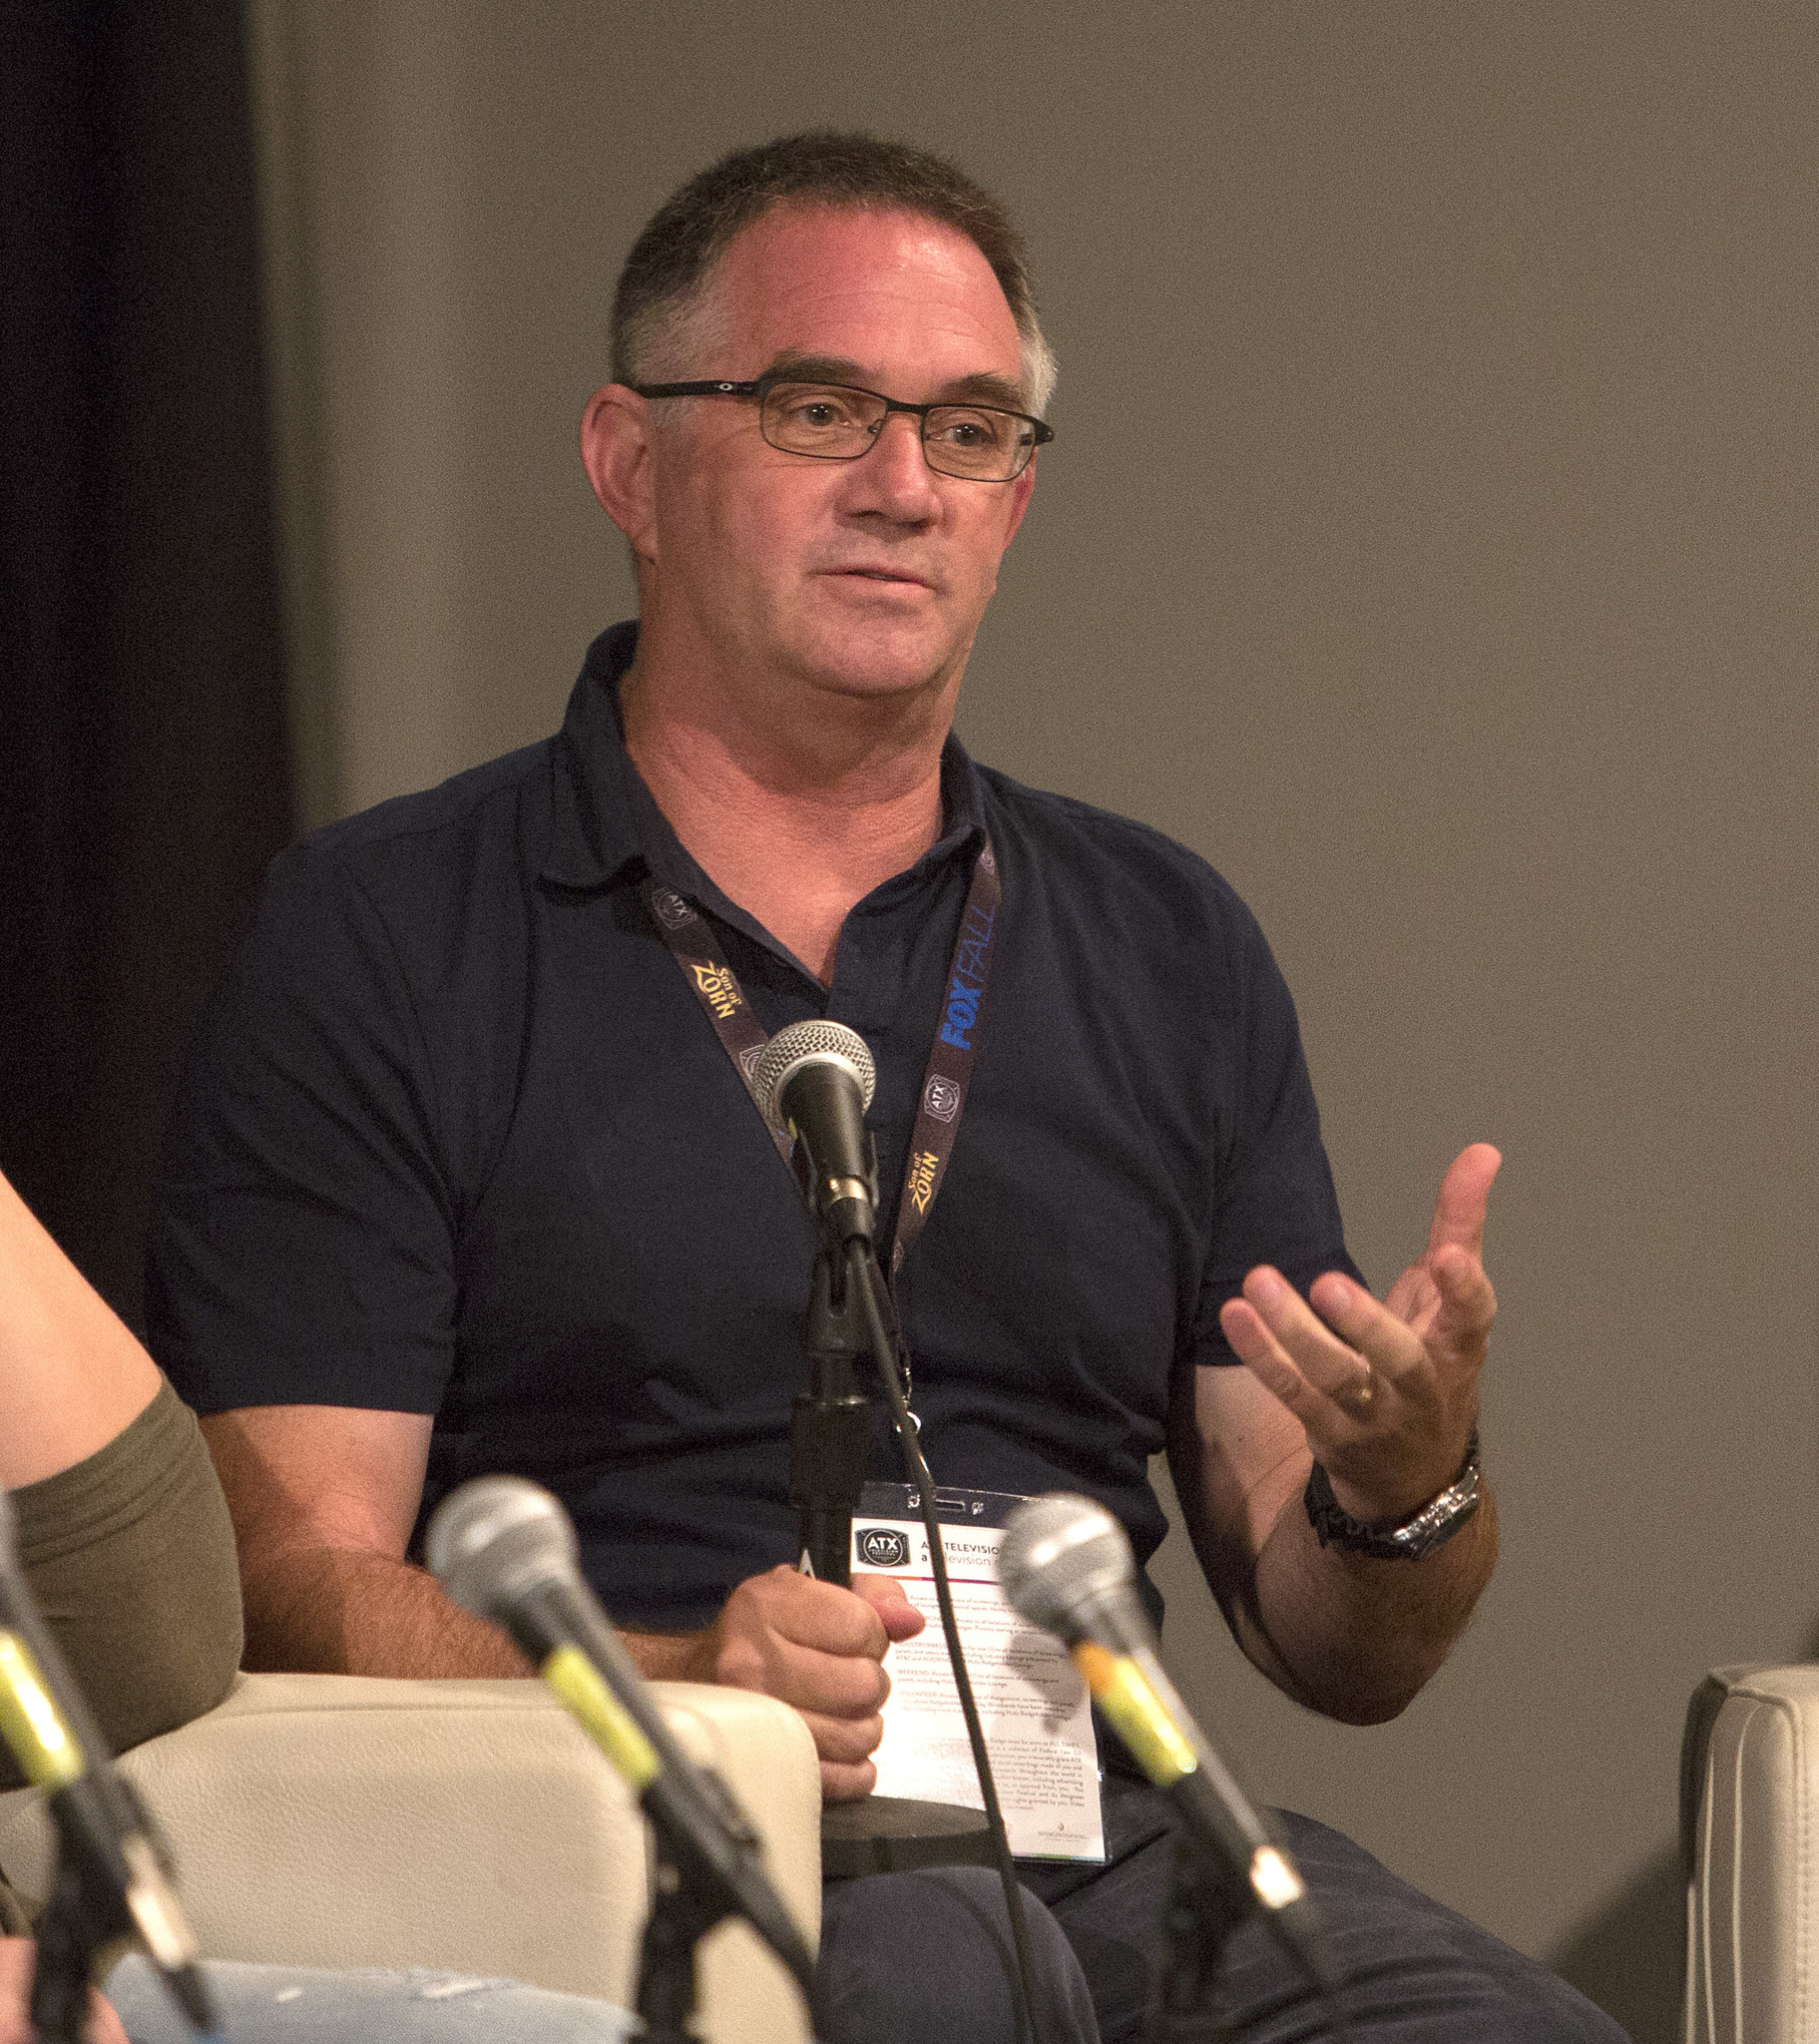 AUSTIN, TX - JUNE 9: Hart Hanson attends "Fandom Rising: The Impact of Fan Culture in the Age of Social Media" panel during the 2016 ATX Television Festival at the Stephen F. Austin InterContinental Hotel on June 9, 2016, in Austin, Texas.